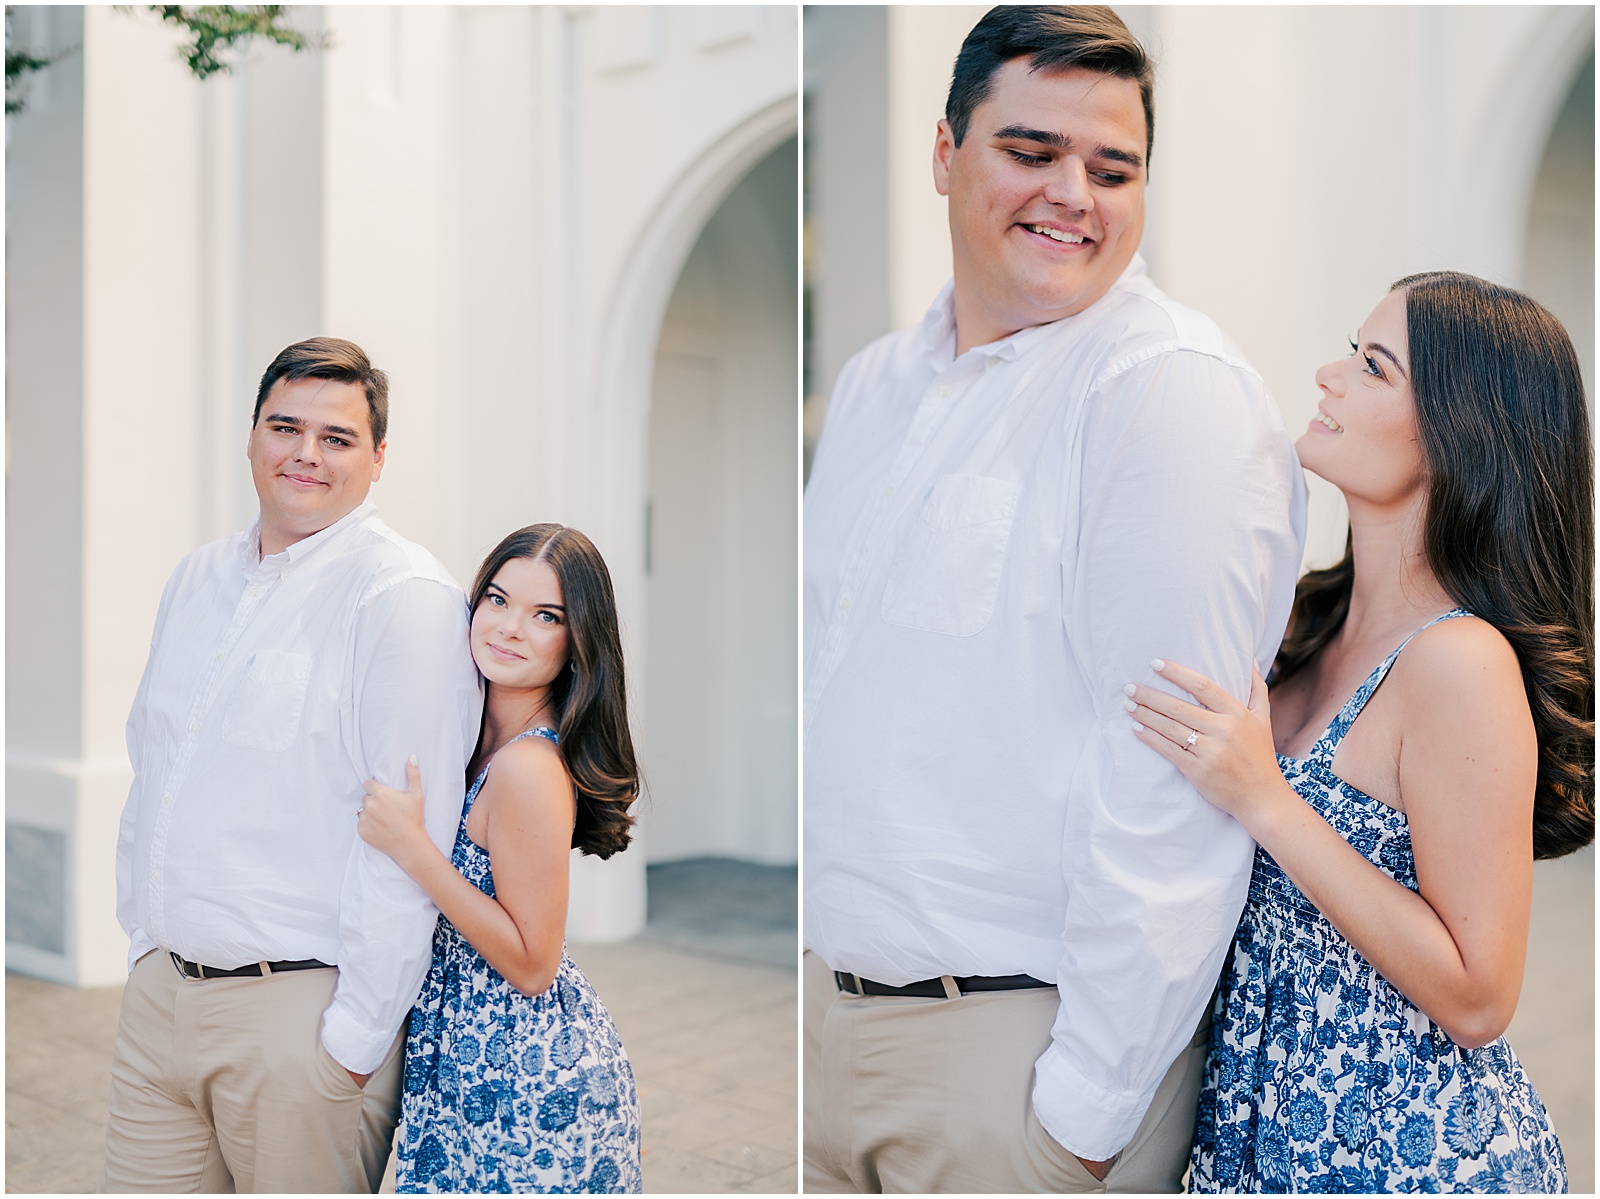 Engagement portraits at the historic First United Methodist Church in Huntsville, Alabama